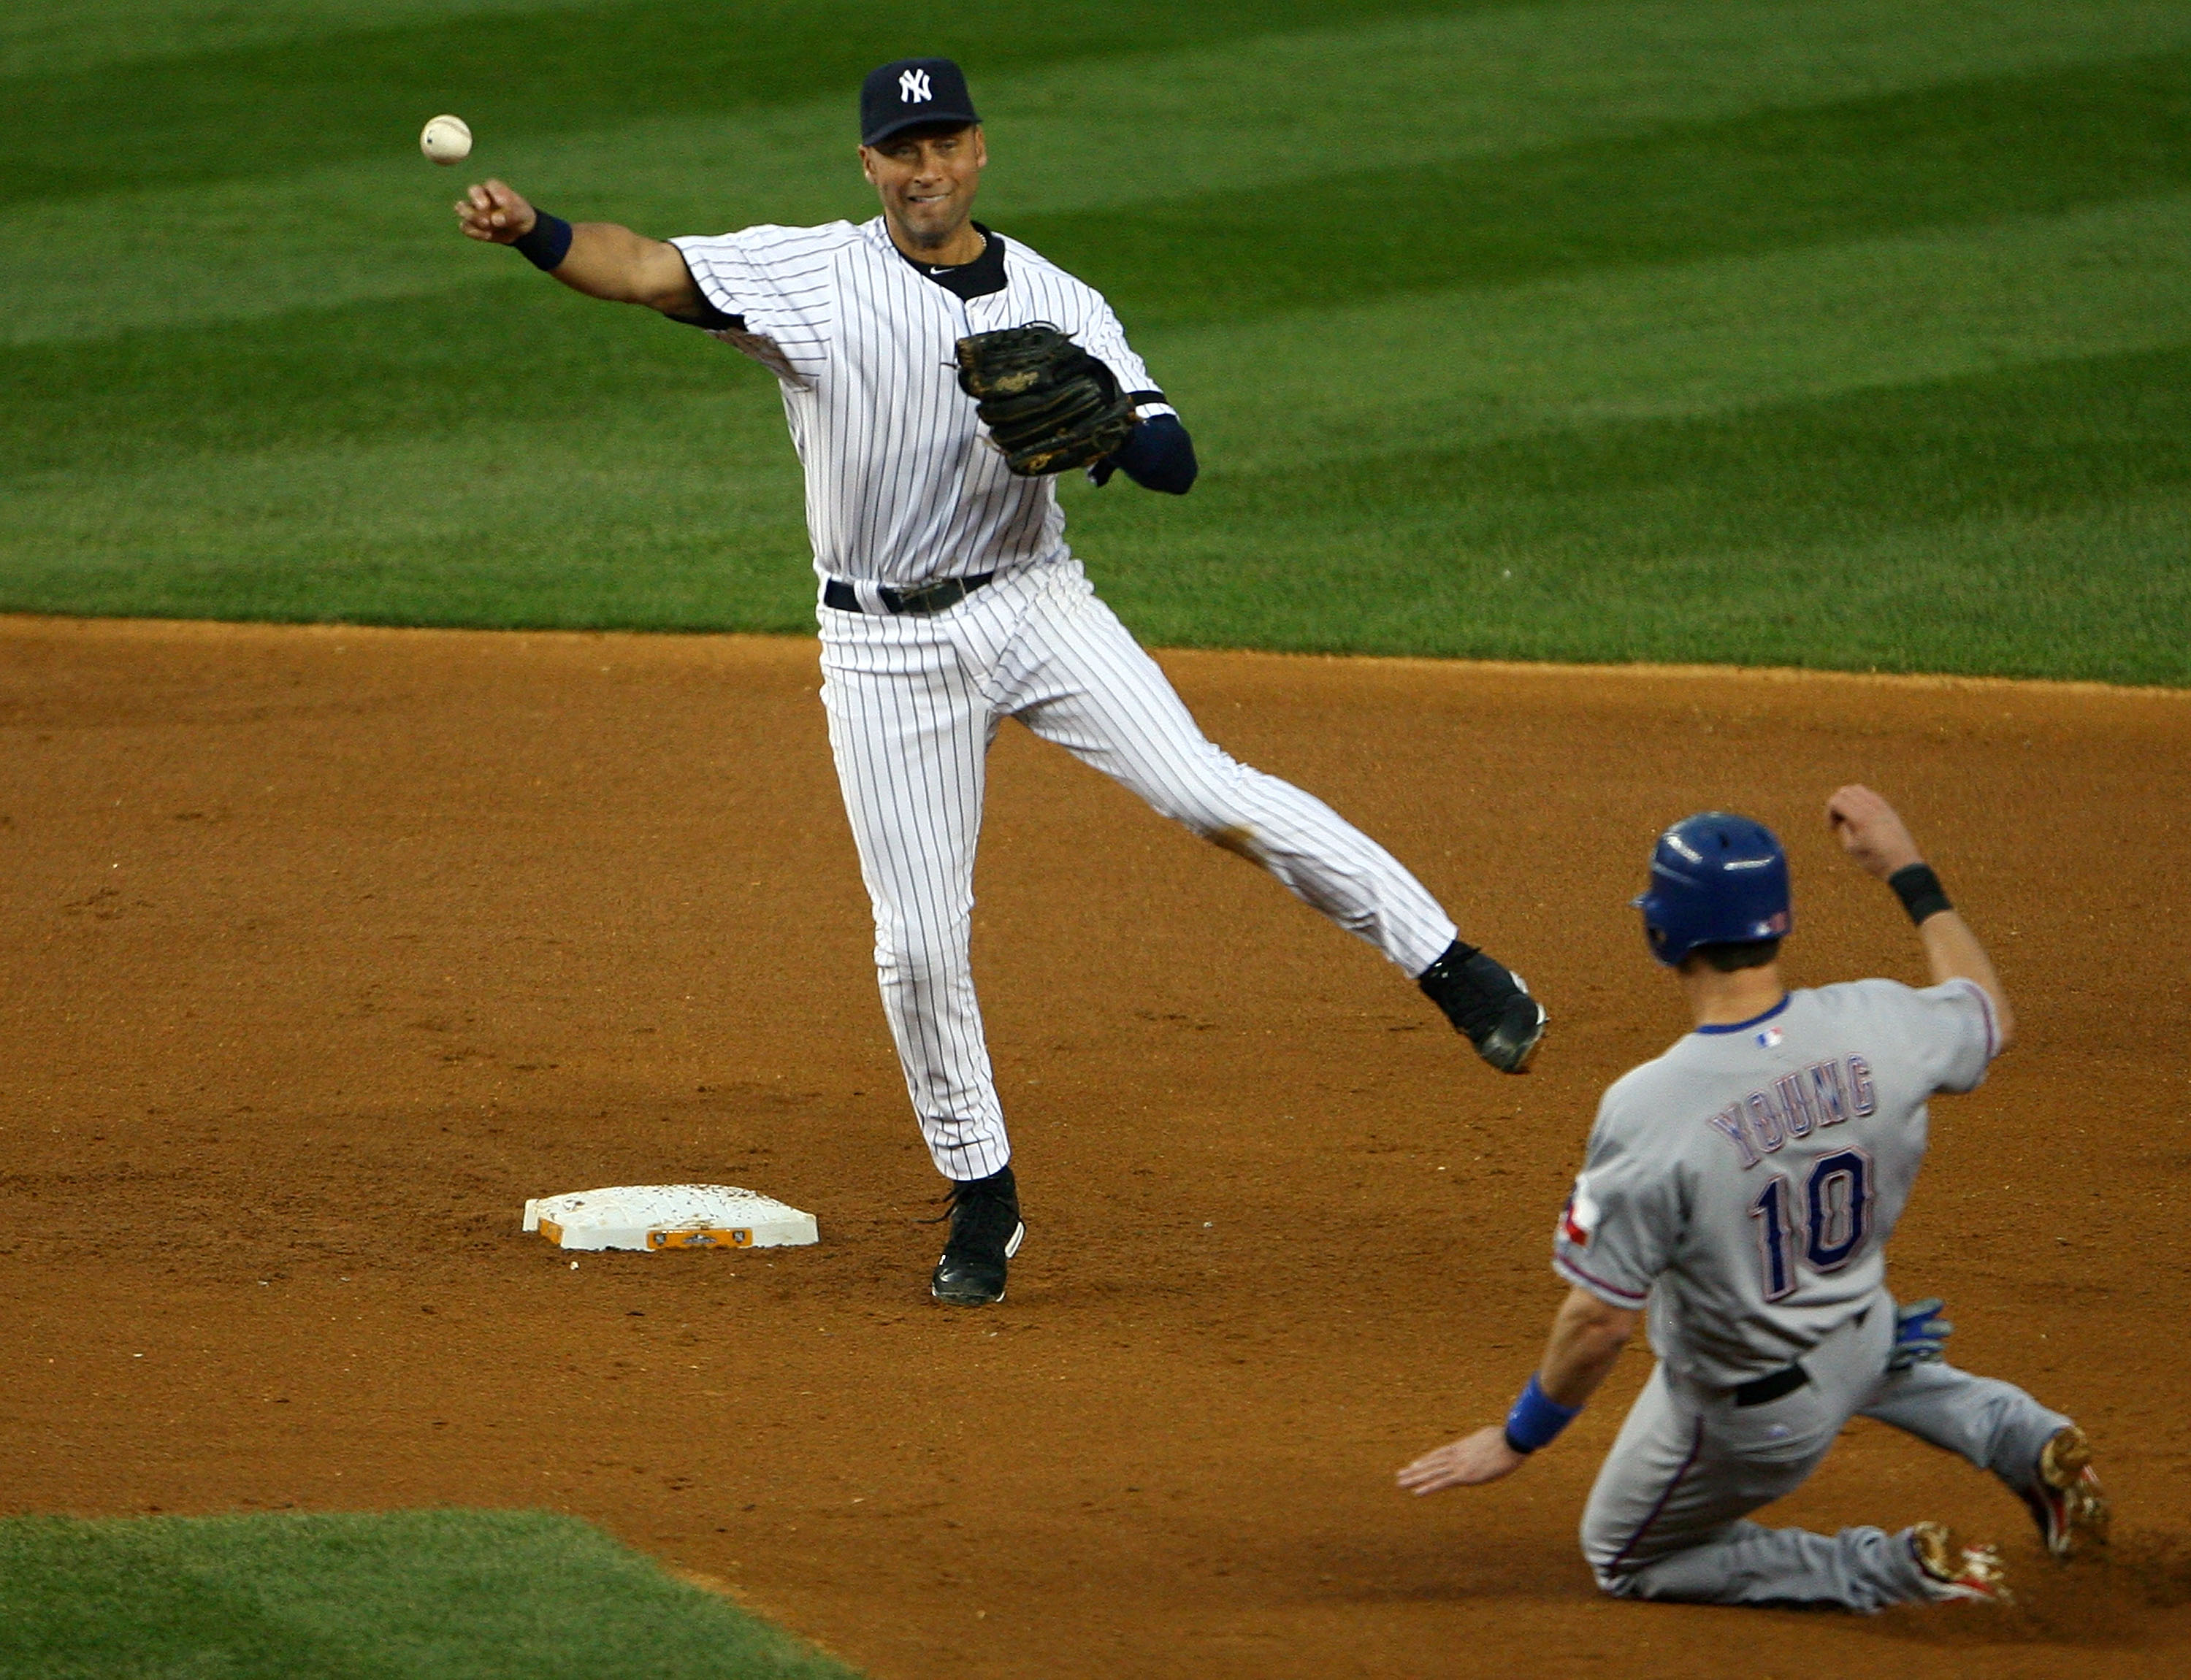 Derek Jeter: Why He Doesn't Deserve Epic New Deal From New York